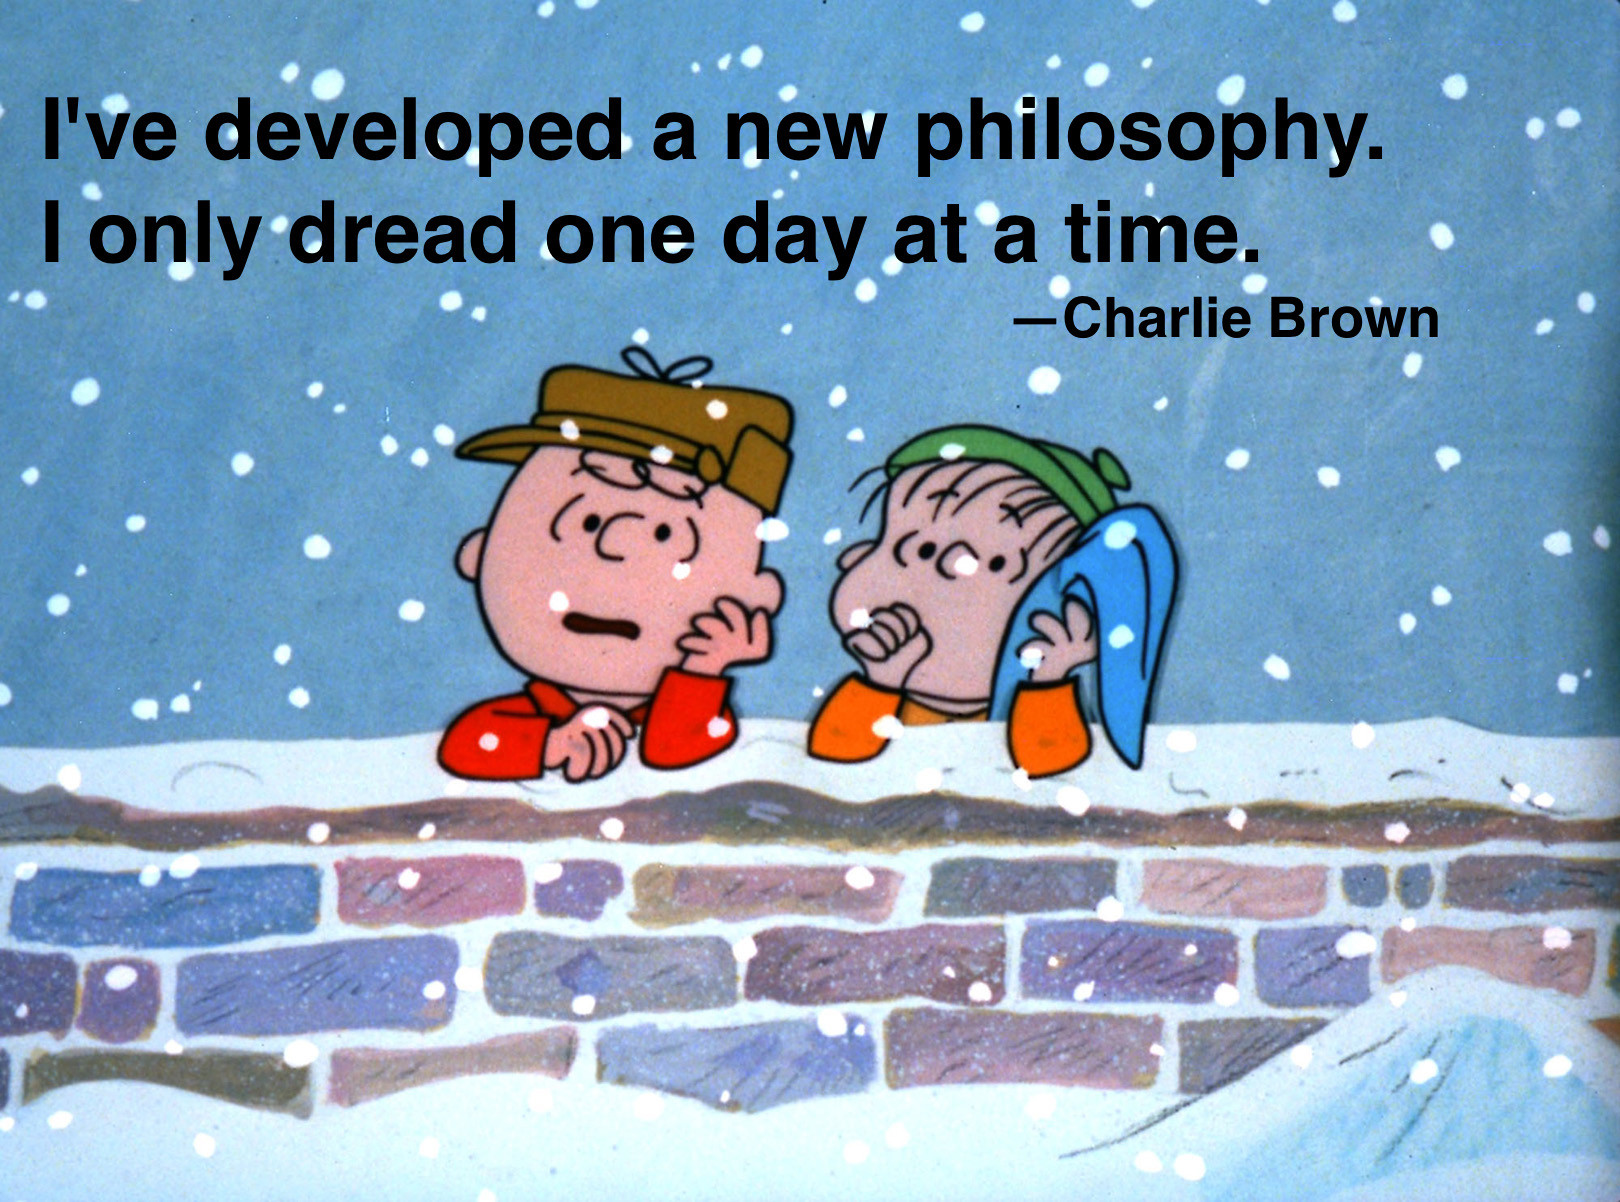 Peanuts Christmas Quotes
 10 of our favorite Peanuts quotes on its 65th